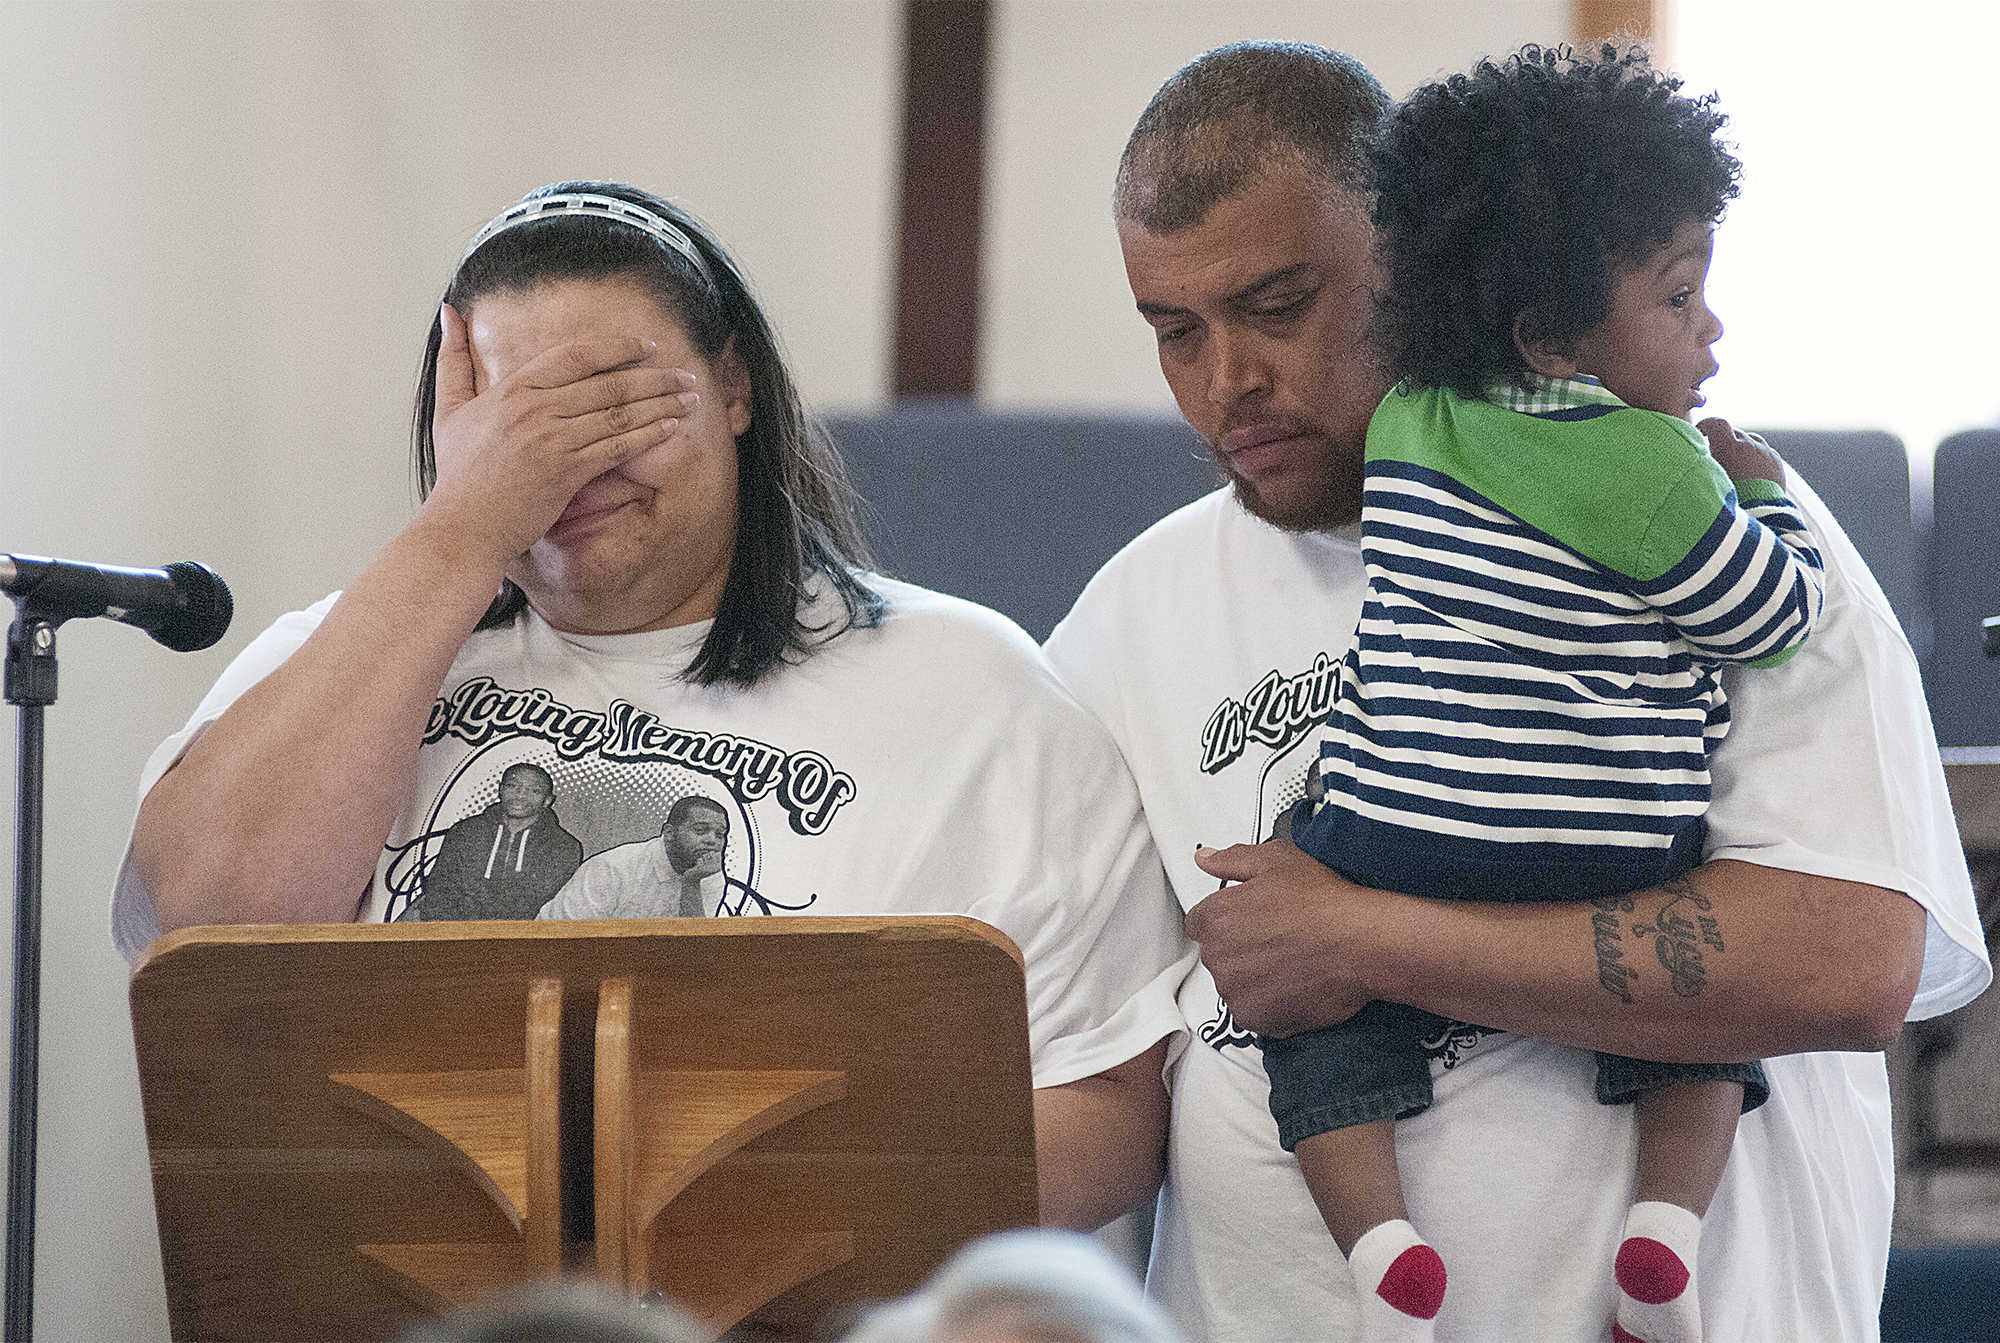  Te-Shawn Wilson, the sister of 2014 triple-shooting victim Tyrone Moss, is overcome with emotion while standing with Vincent Moss and little cousin Josiah McClain, 1, while trying to speak to the group gathered at the House of Prayer Church in Brist